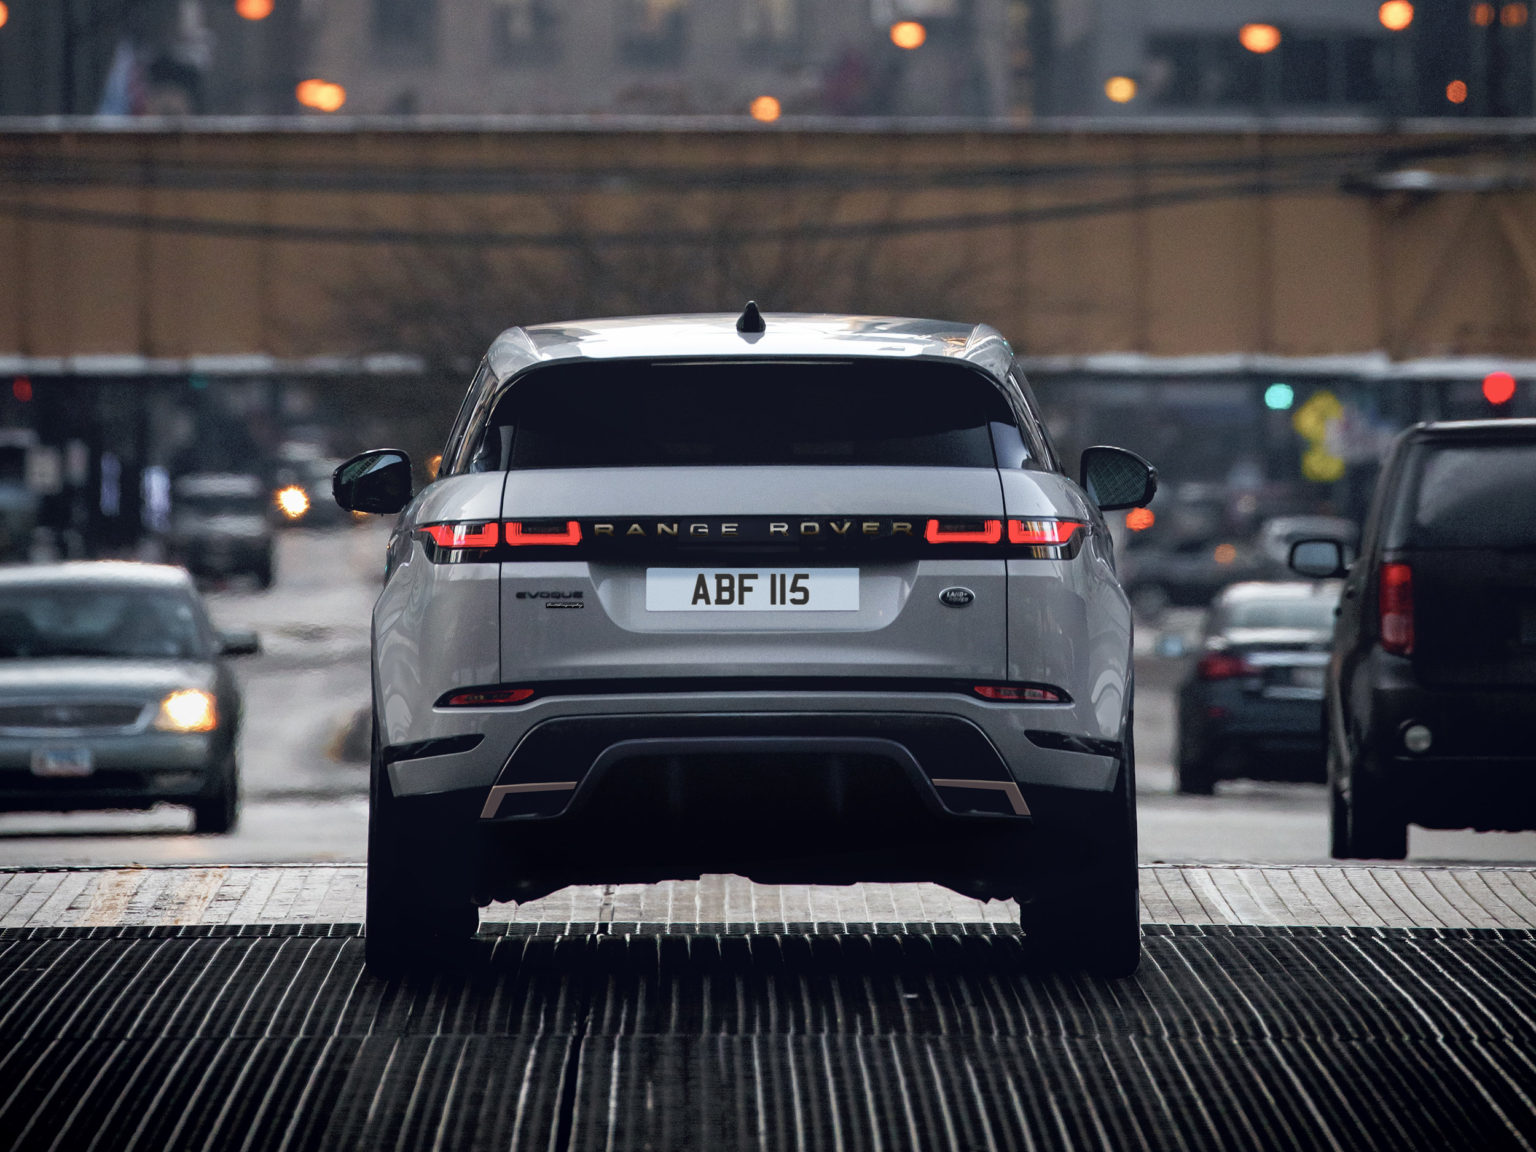 Land Rover is offering a new Range Rover Evoque model and updated infotainment system for 2021.